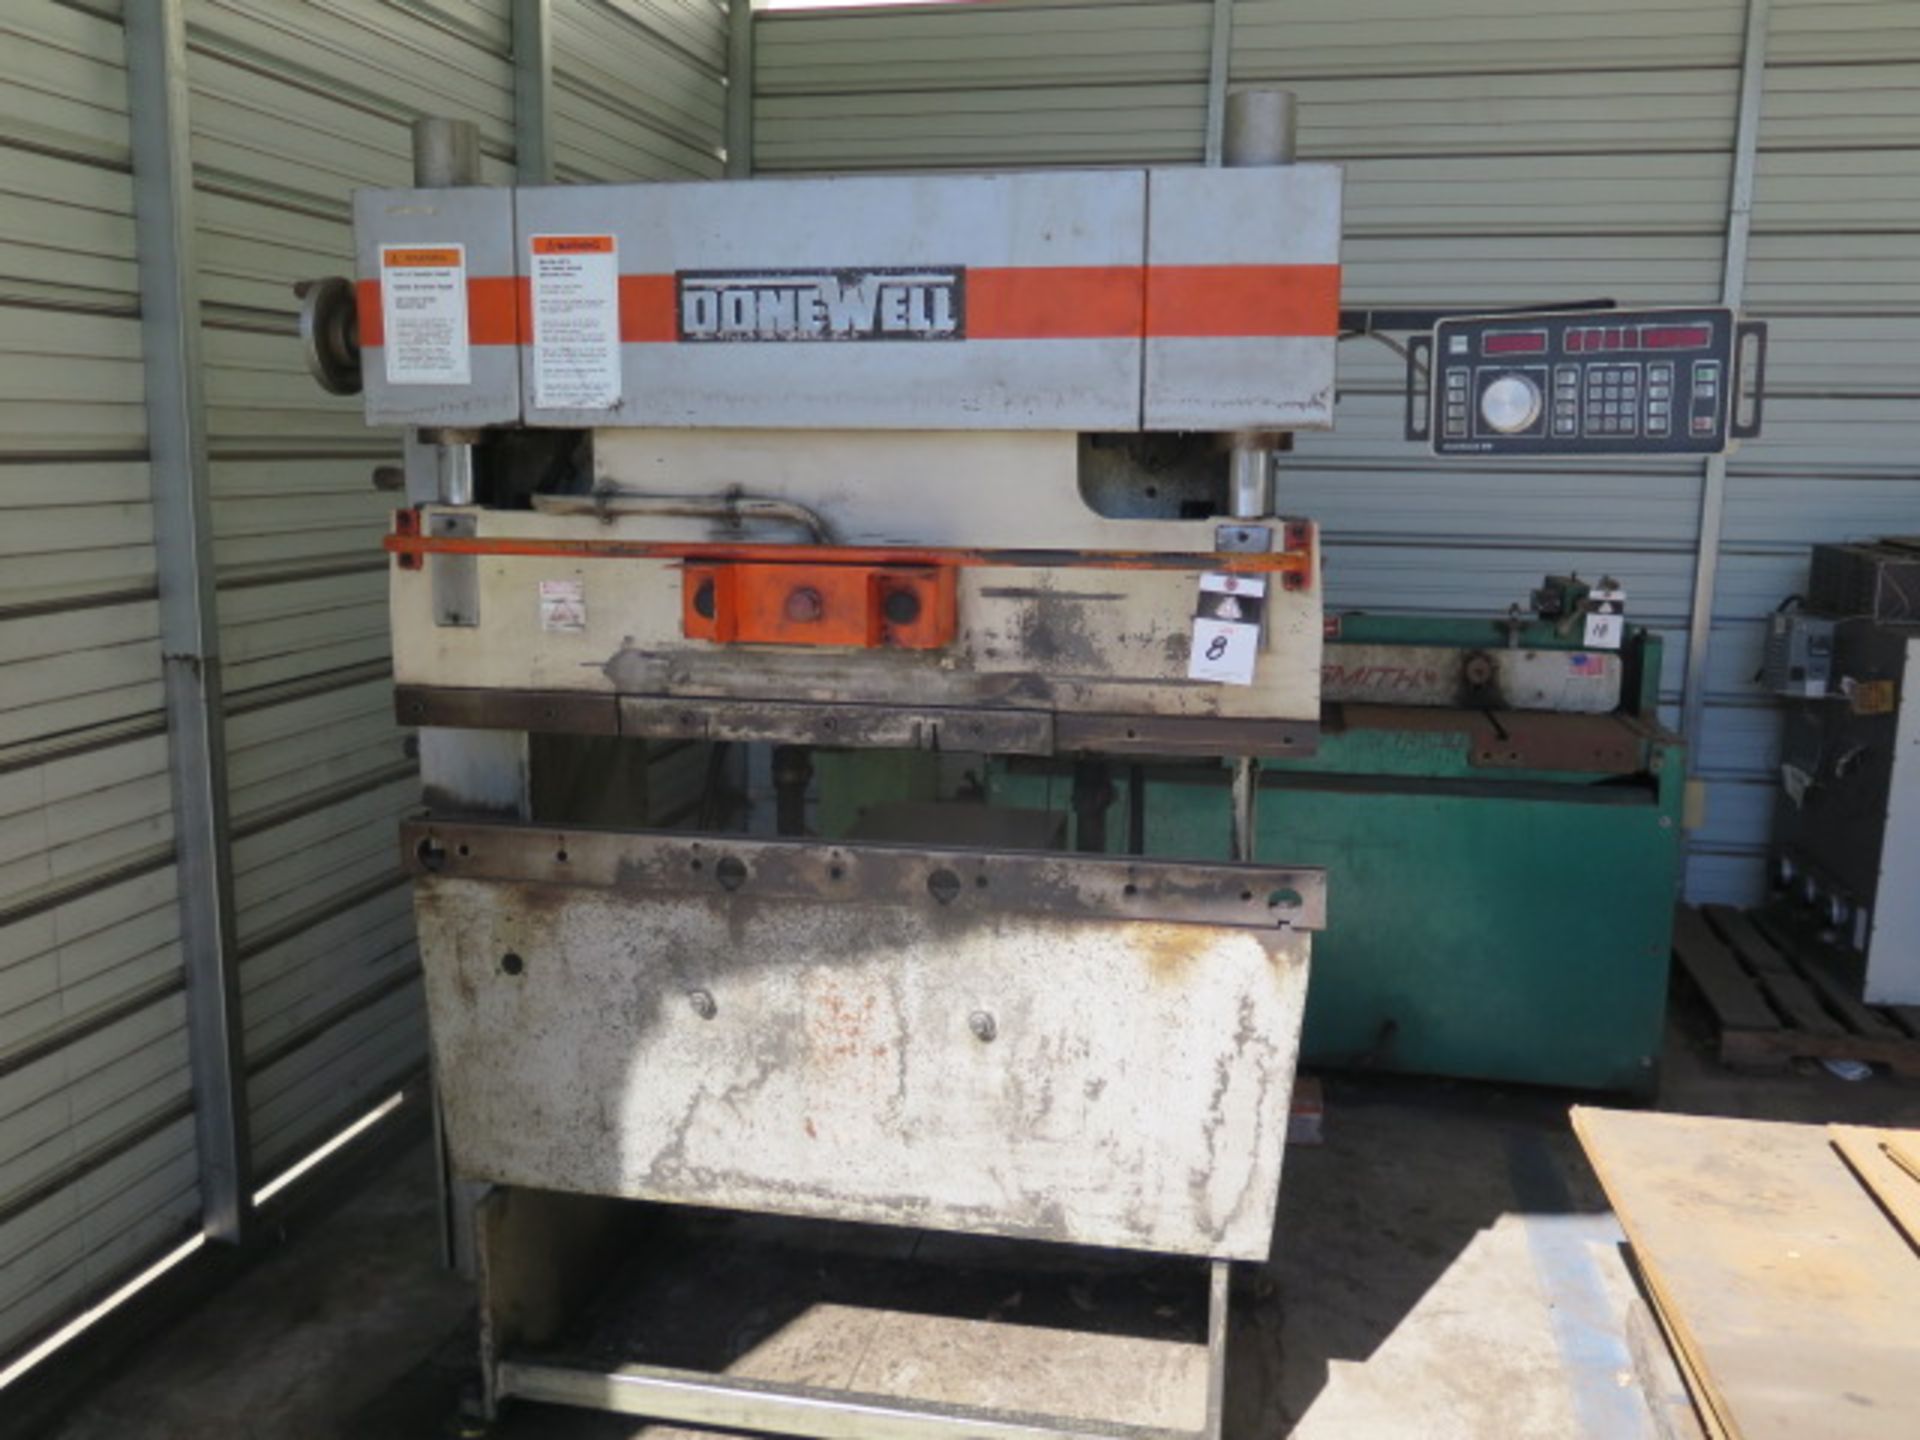 Donewell 17-1300 17 Ton x 51” CNC Hyd Press Brake (NEEDS ELECTRICAL - WAS VANDALIZED) SOLD AS IS